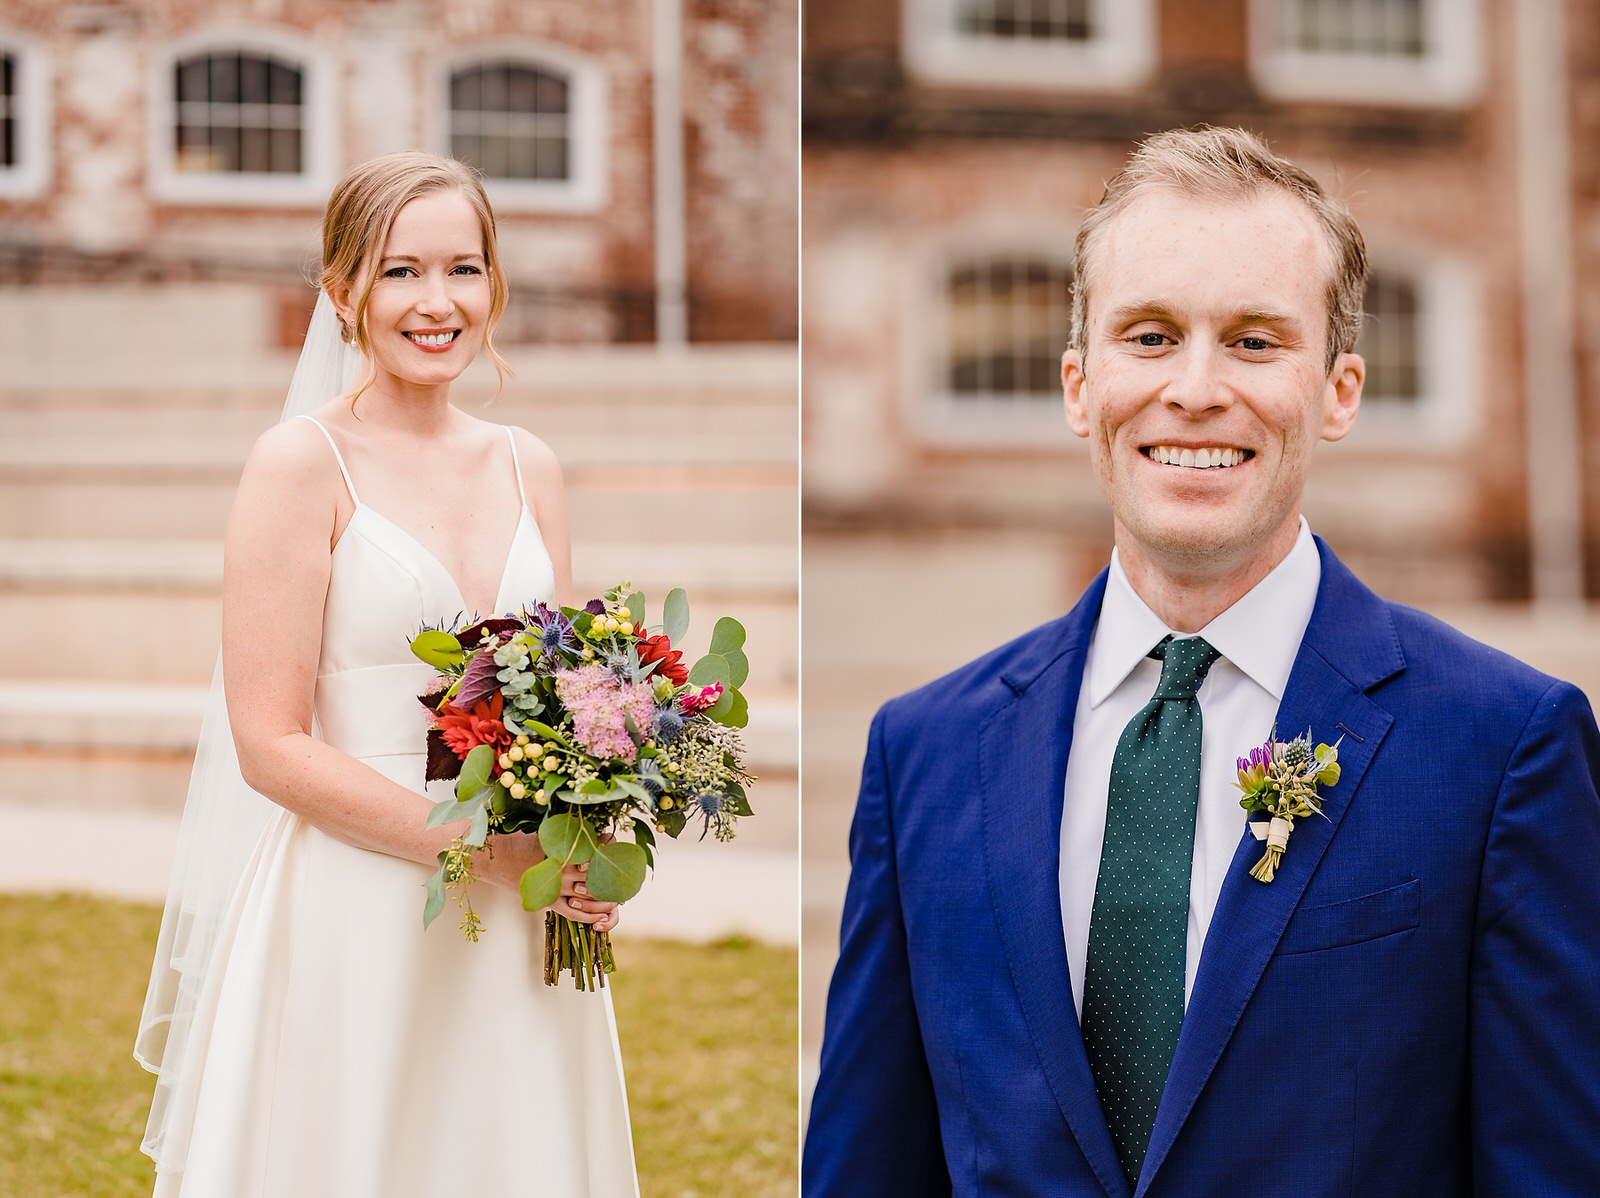 Wedding floral inspiration from Tre Bella in Durham, NC